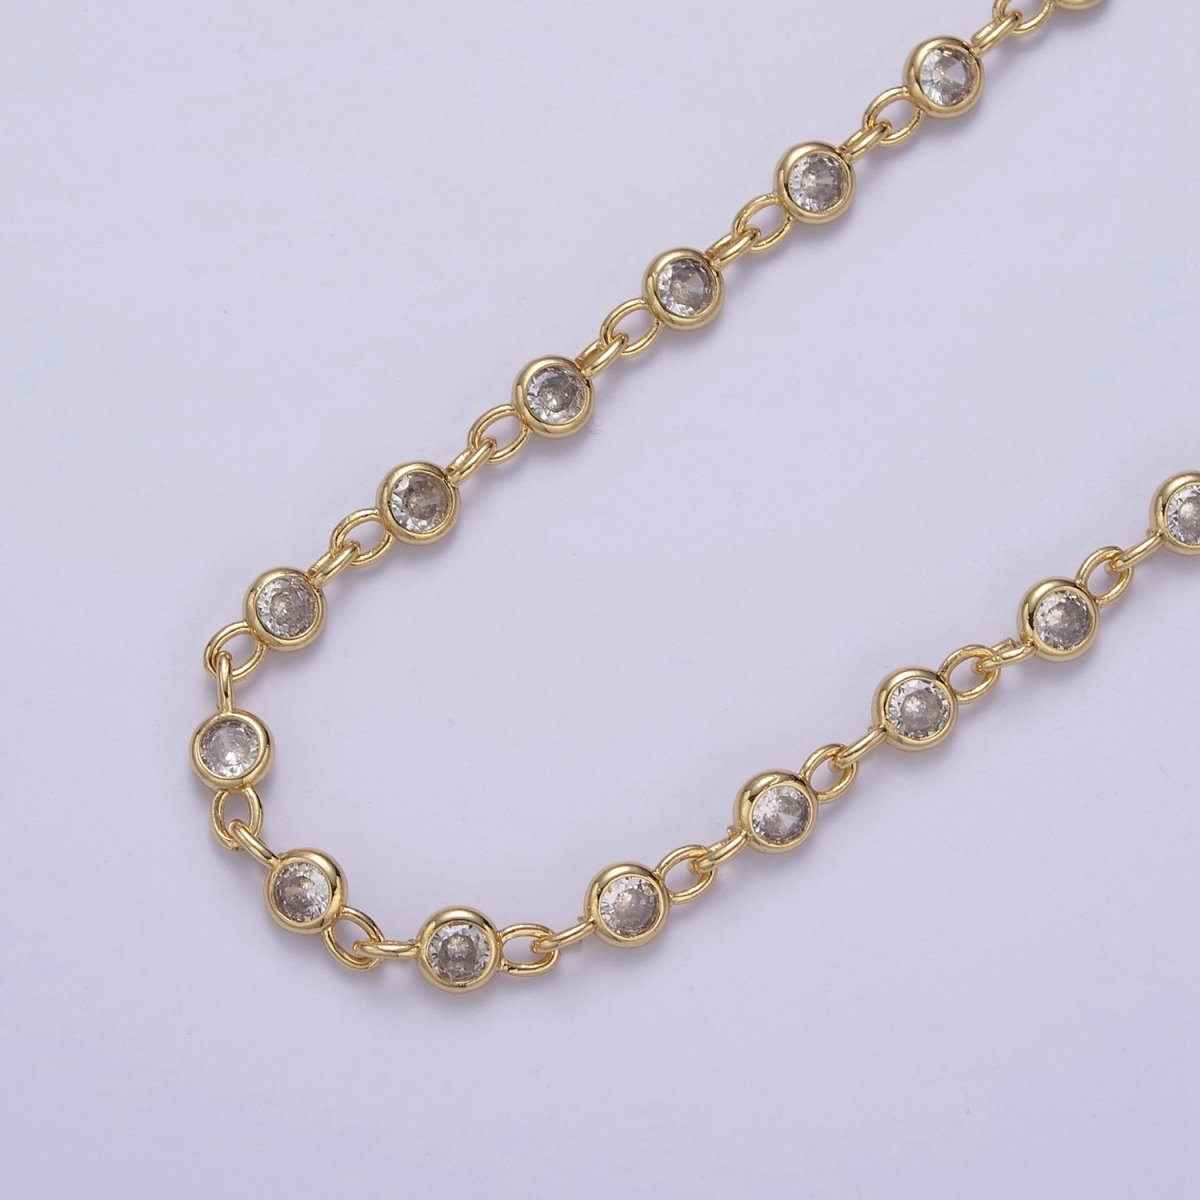 24k Gold Filled Chain Round CZ Chain by Foot / Yard Bulk Chain Round Bezel Cut Cubic Chains 5mm CZ Chain Unsoldered | ROLL-743 744 745 746 Clearance Pricing - DLUXCA